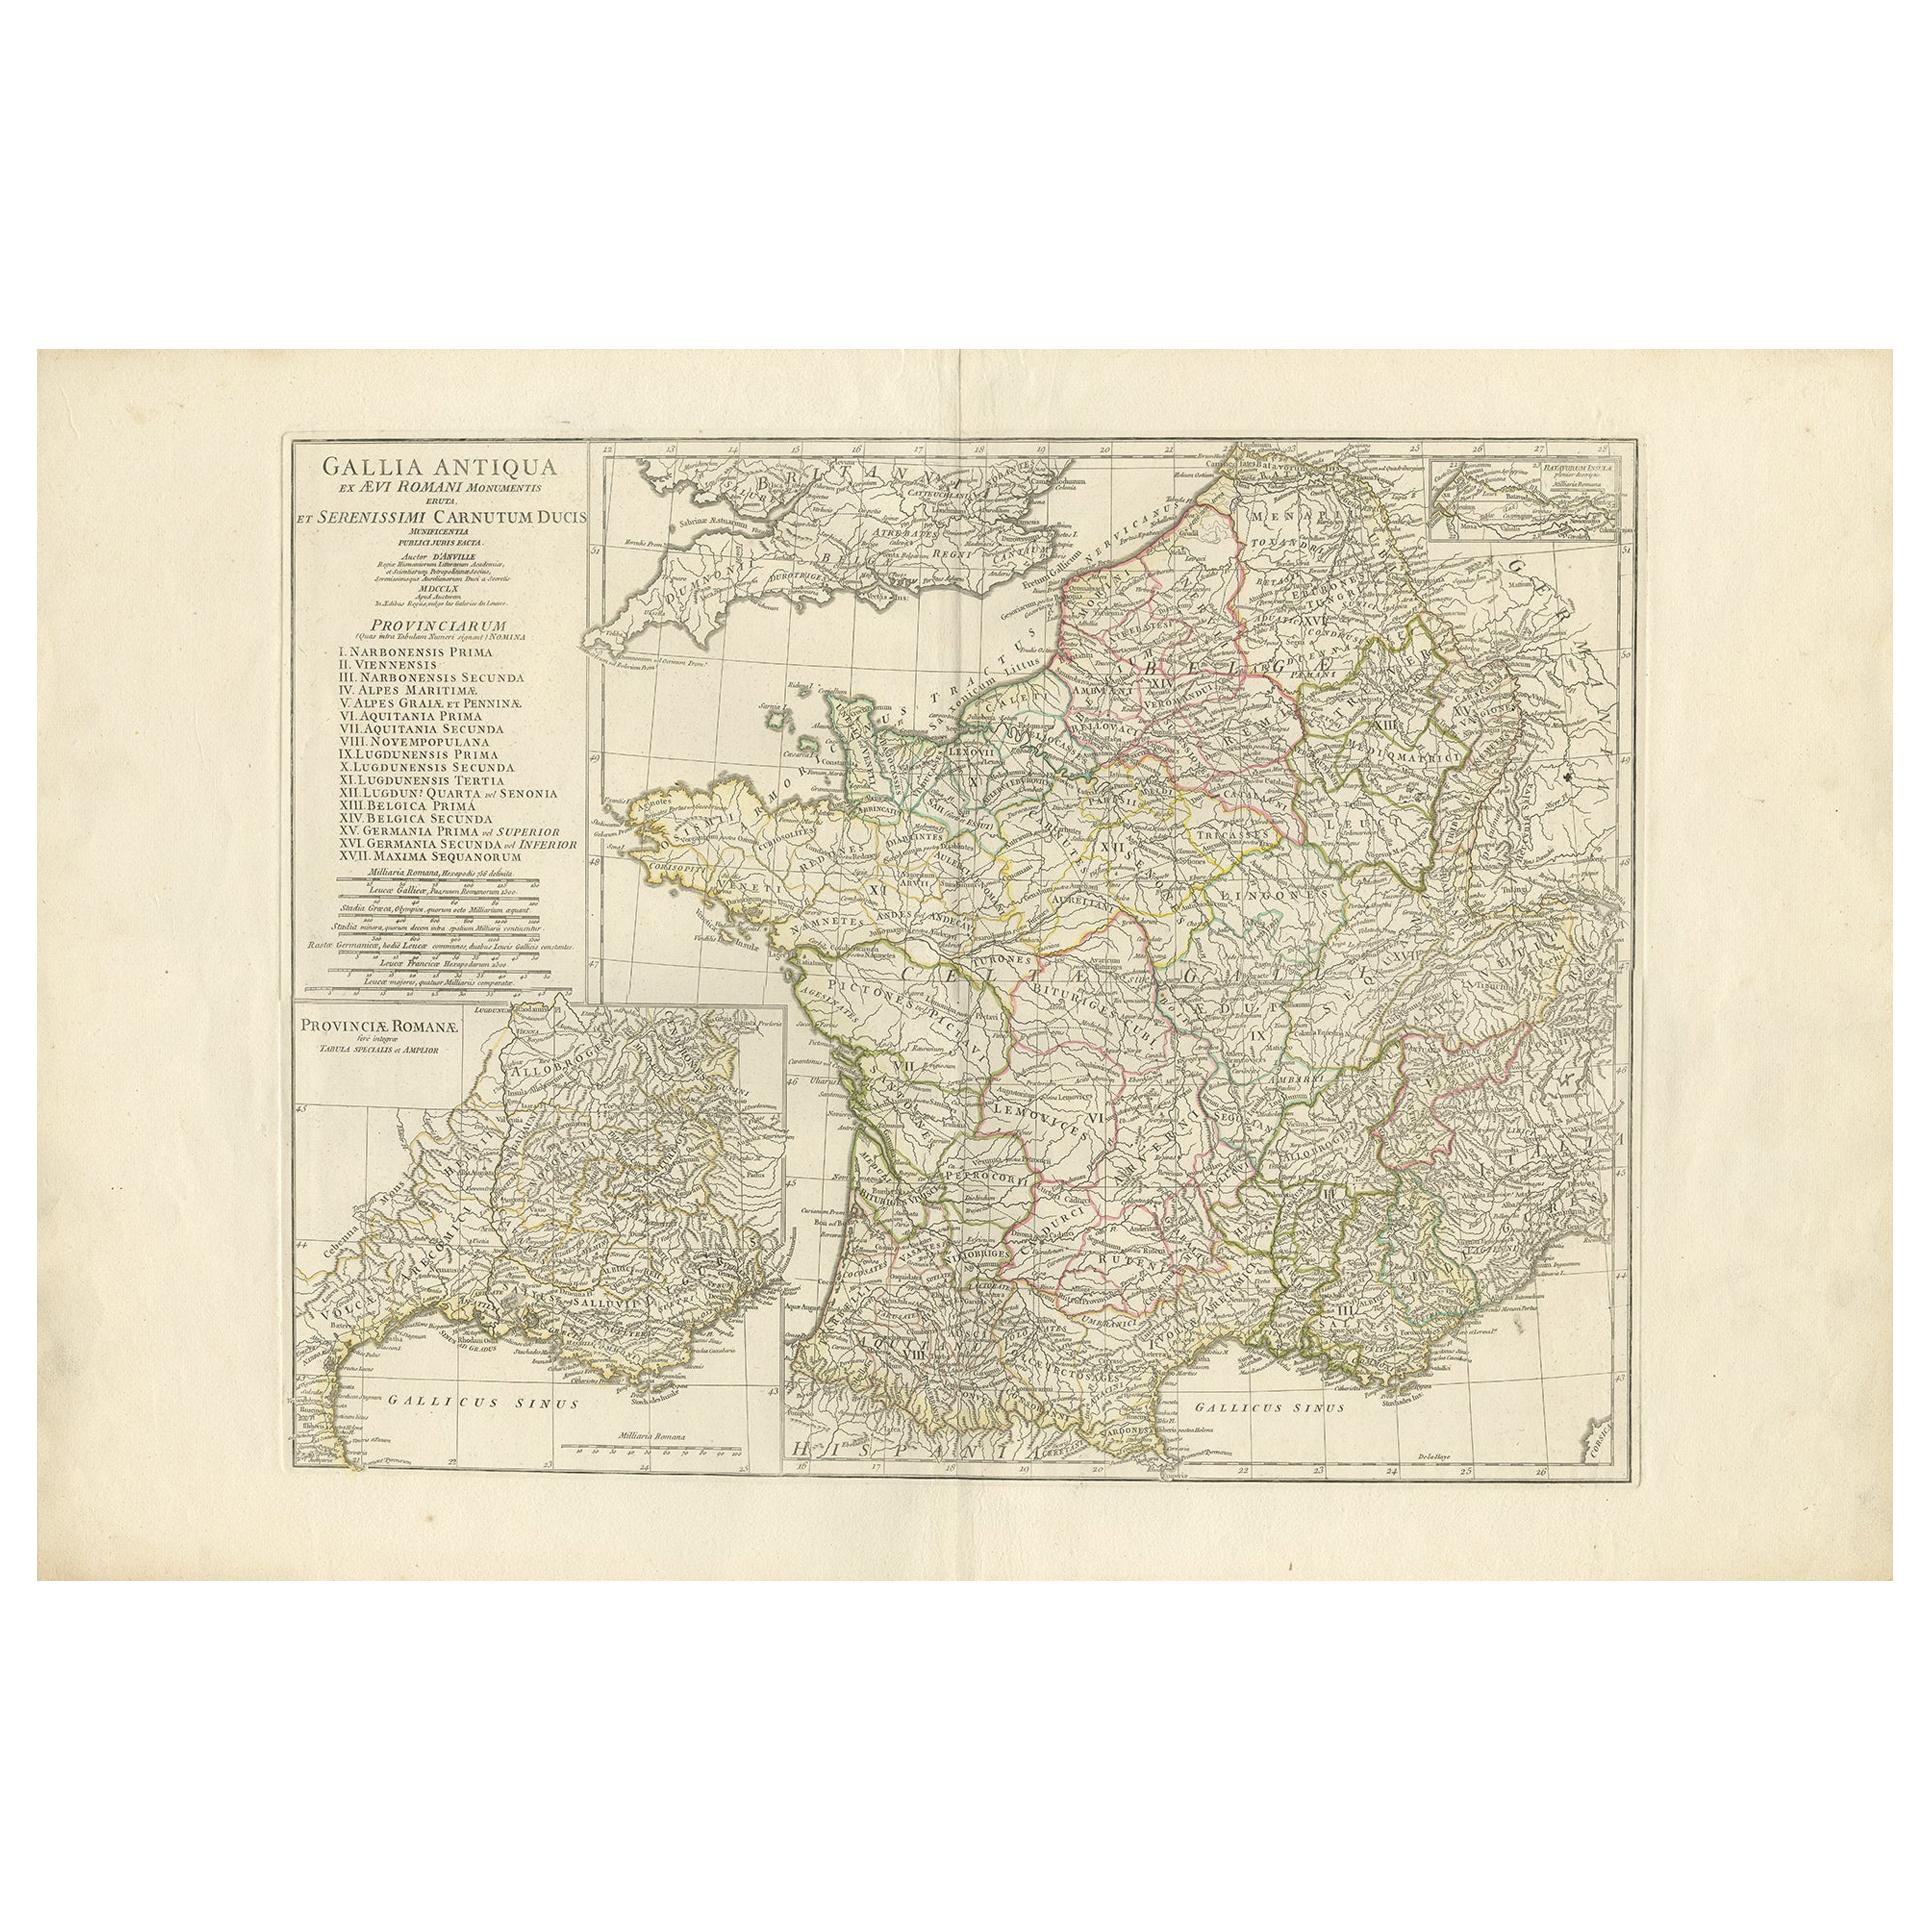 Antique Map of France in Ancient Roman Times by d'Anville 'c.1795'